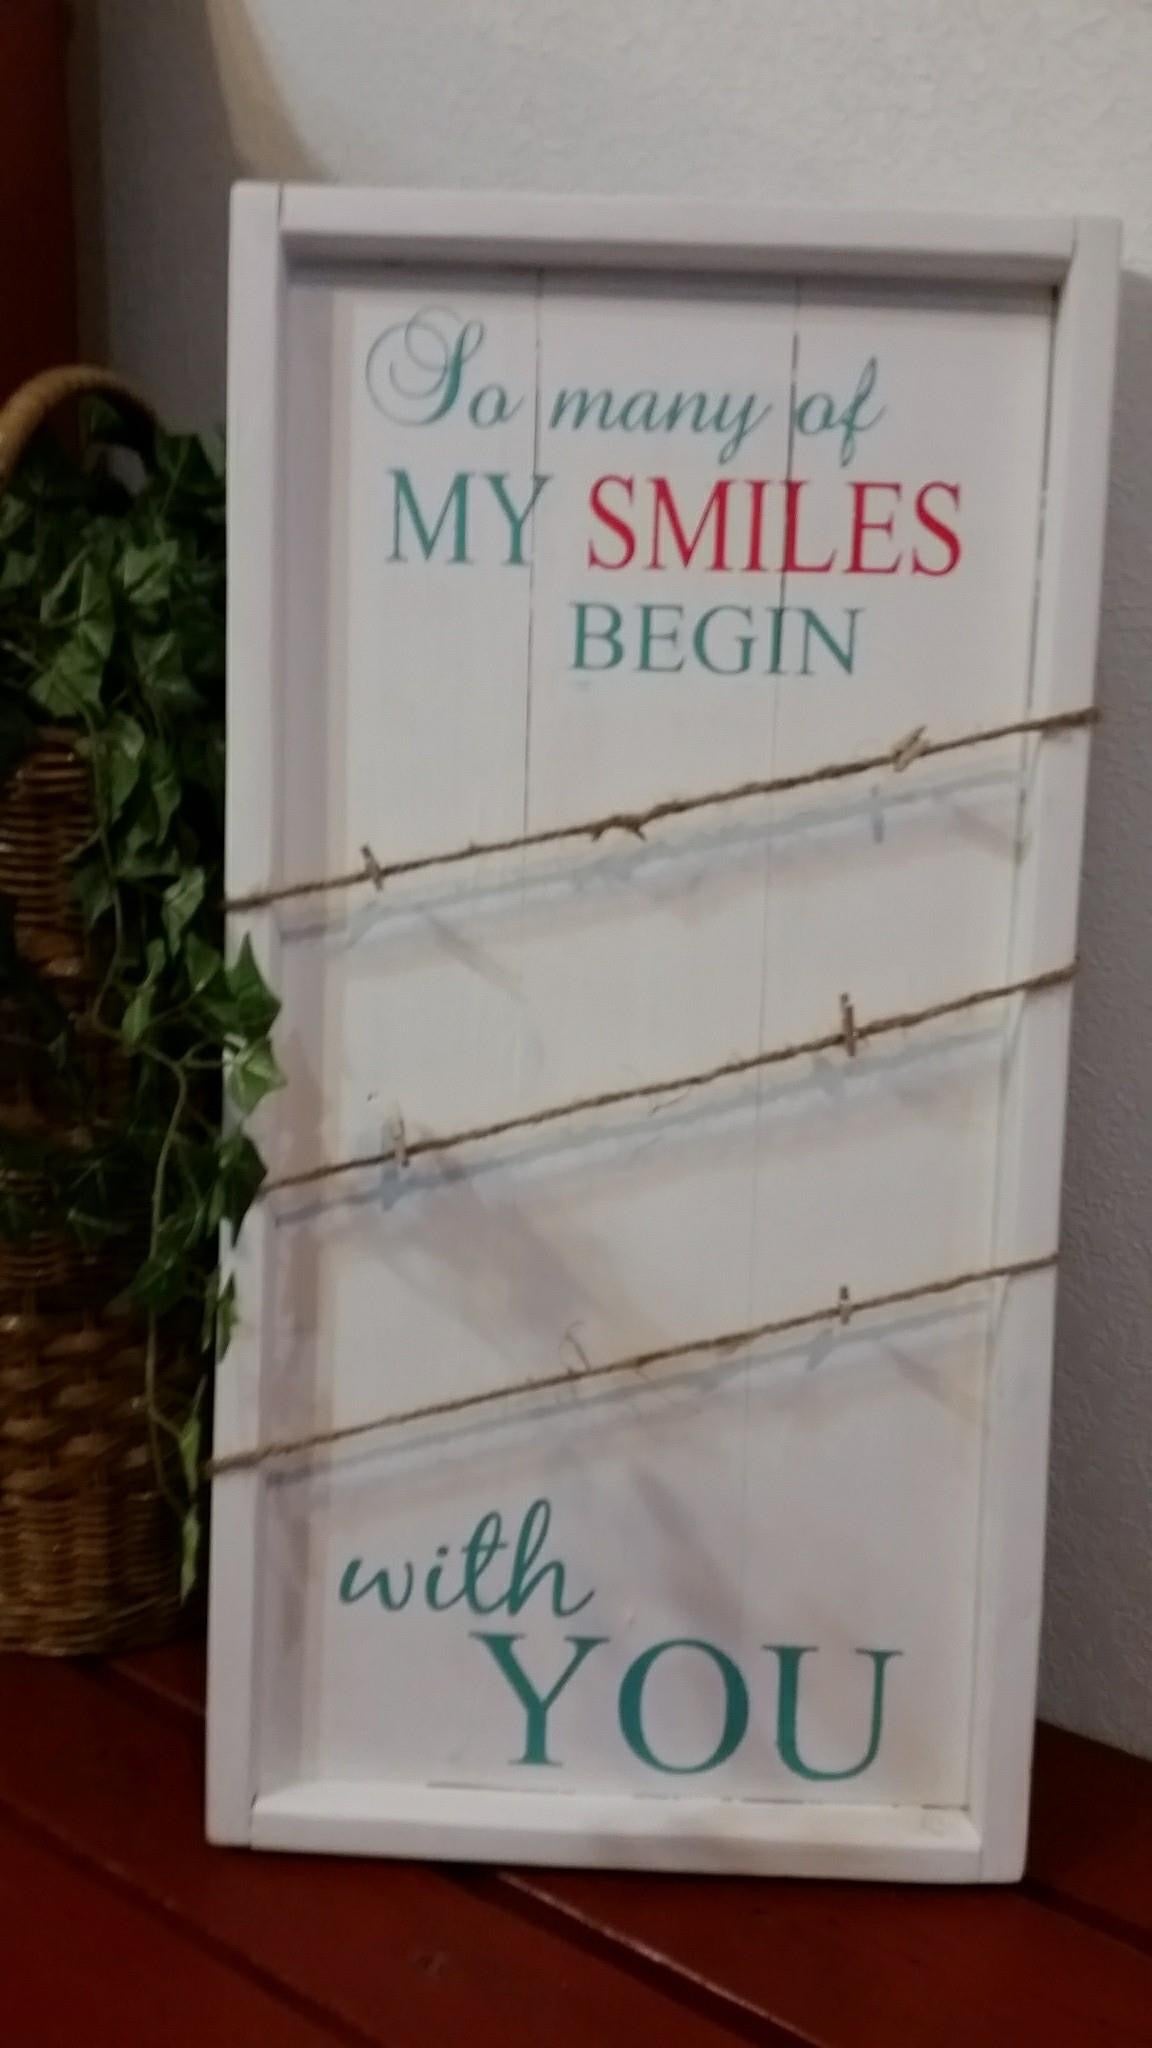 So many smiles begin with you - Photo Board